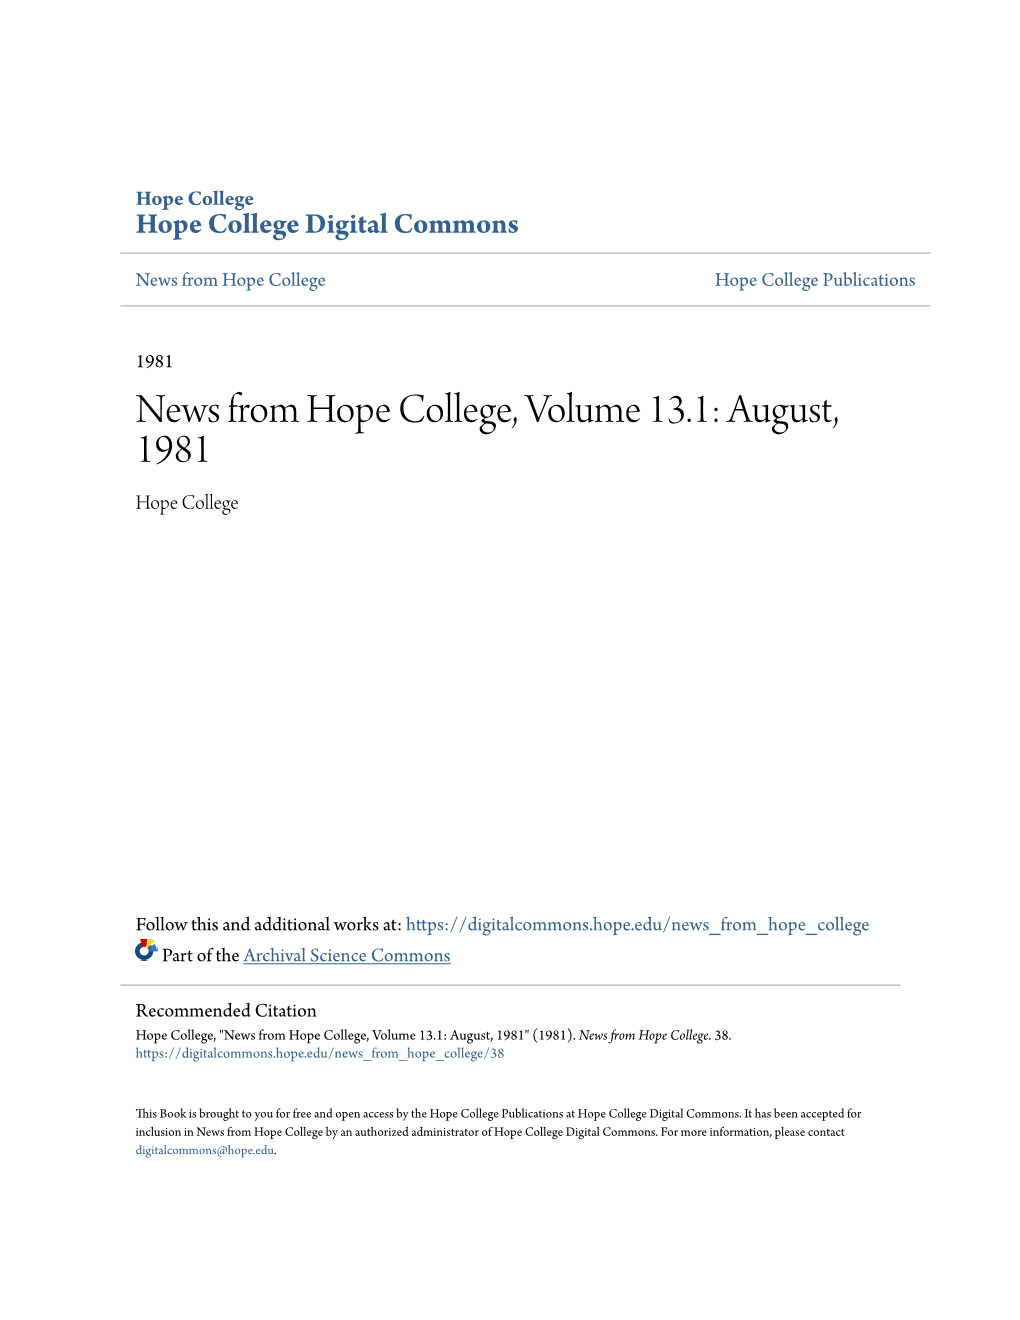 News from Hope College, Volume 13.1: August, 1981 Hope College